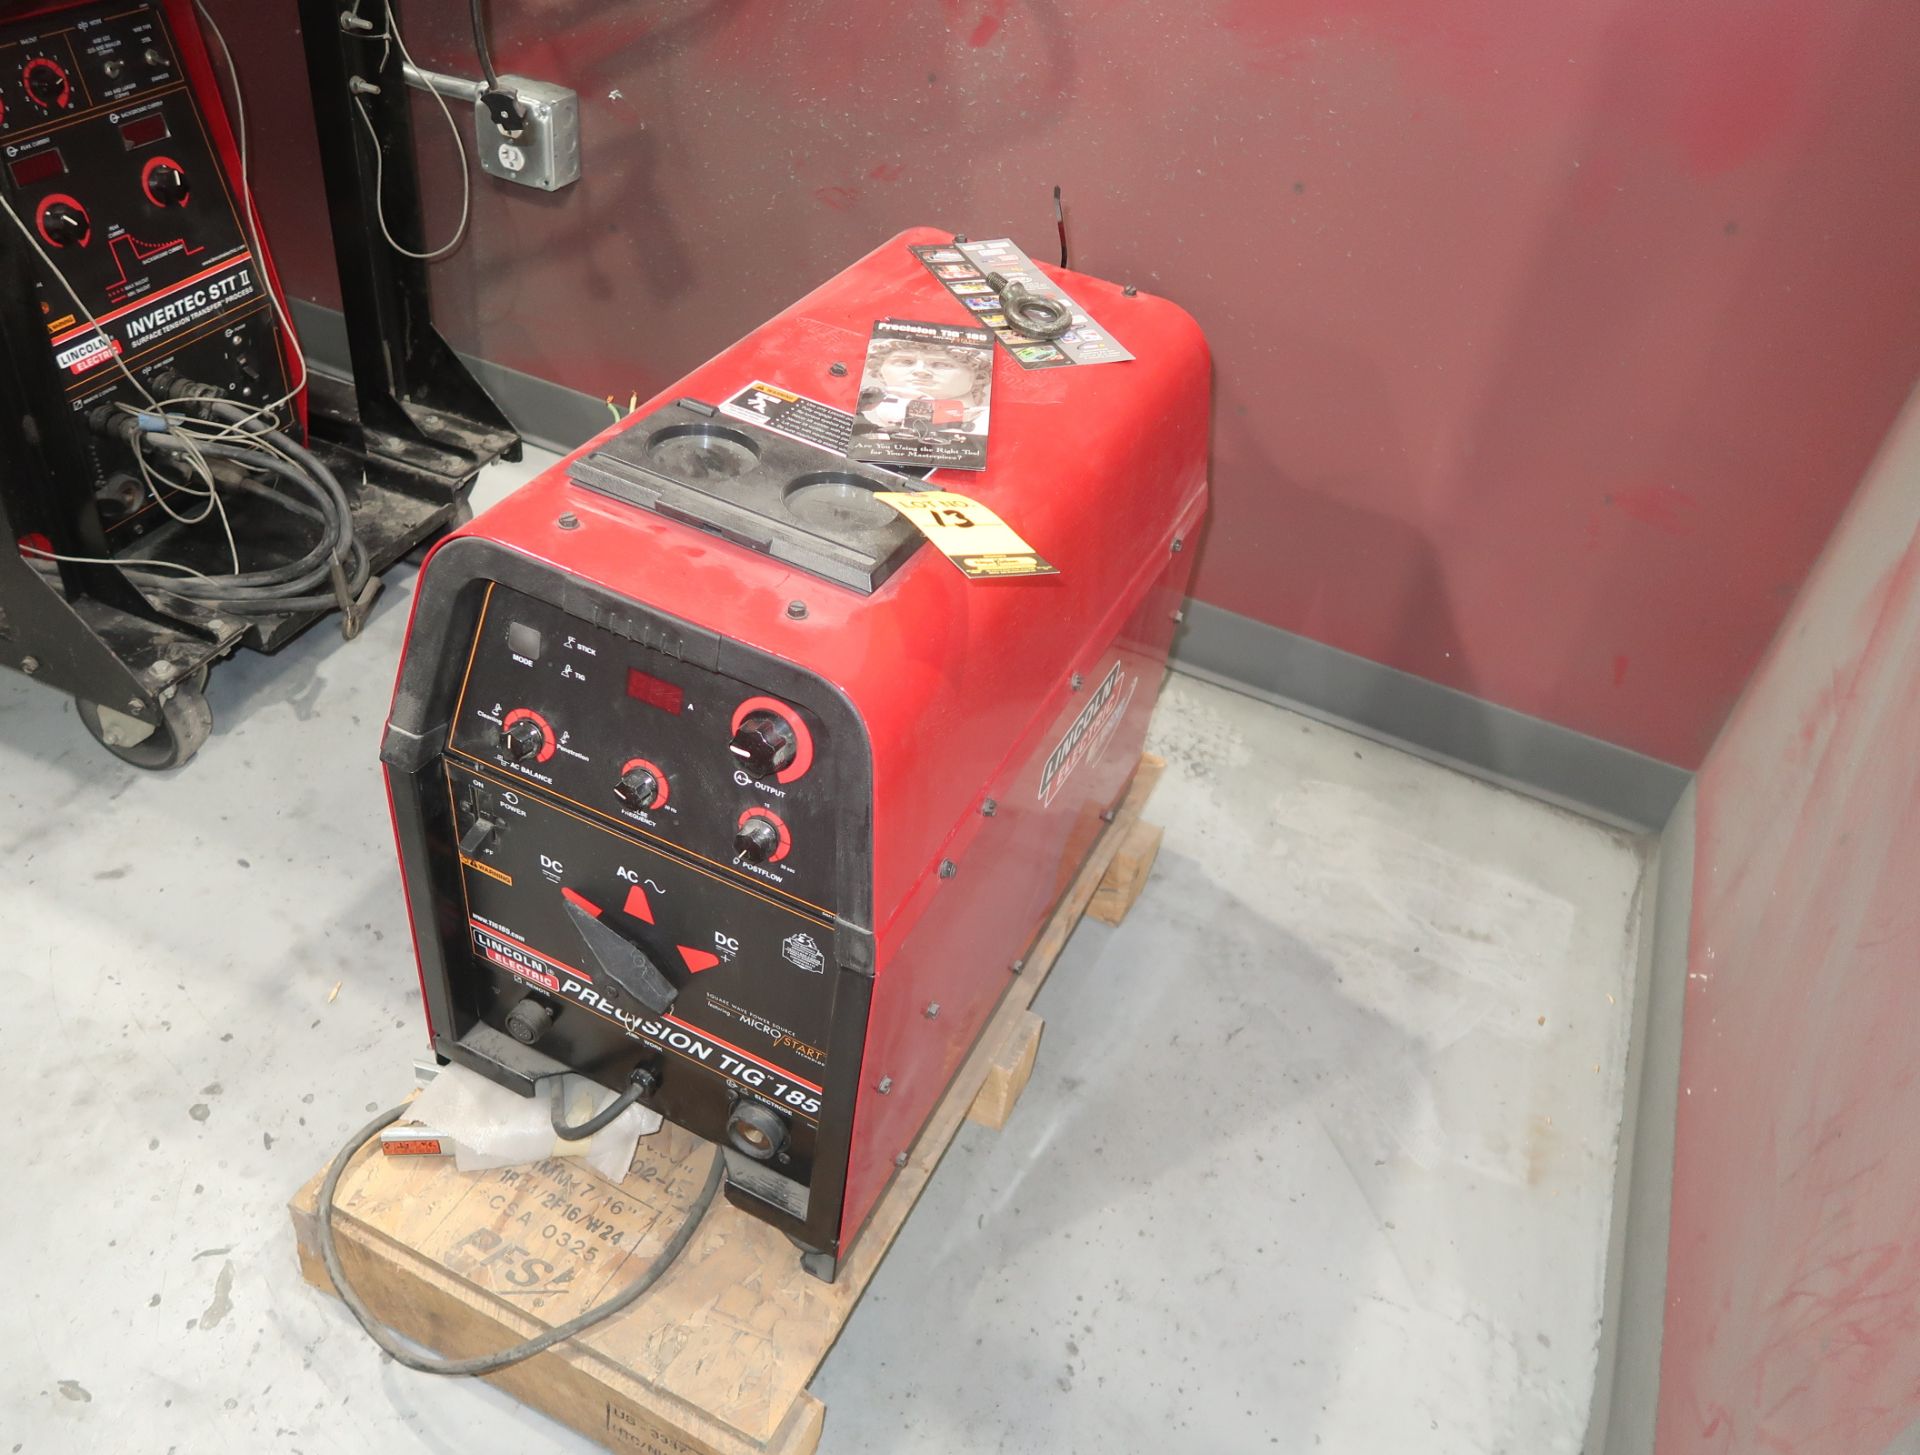 LINCOLN PRECISION TIG 185 SN. U1050612912 THIS WELDER IS (NEW OUT OF CRATE) NEVER USED!